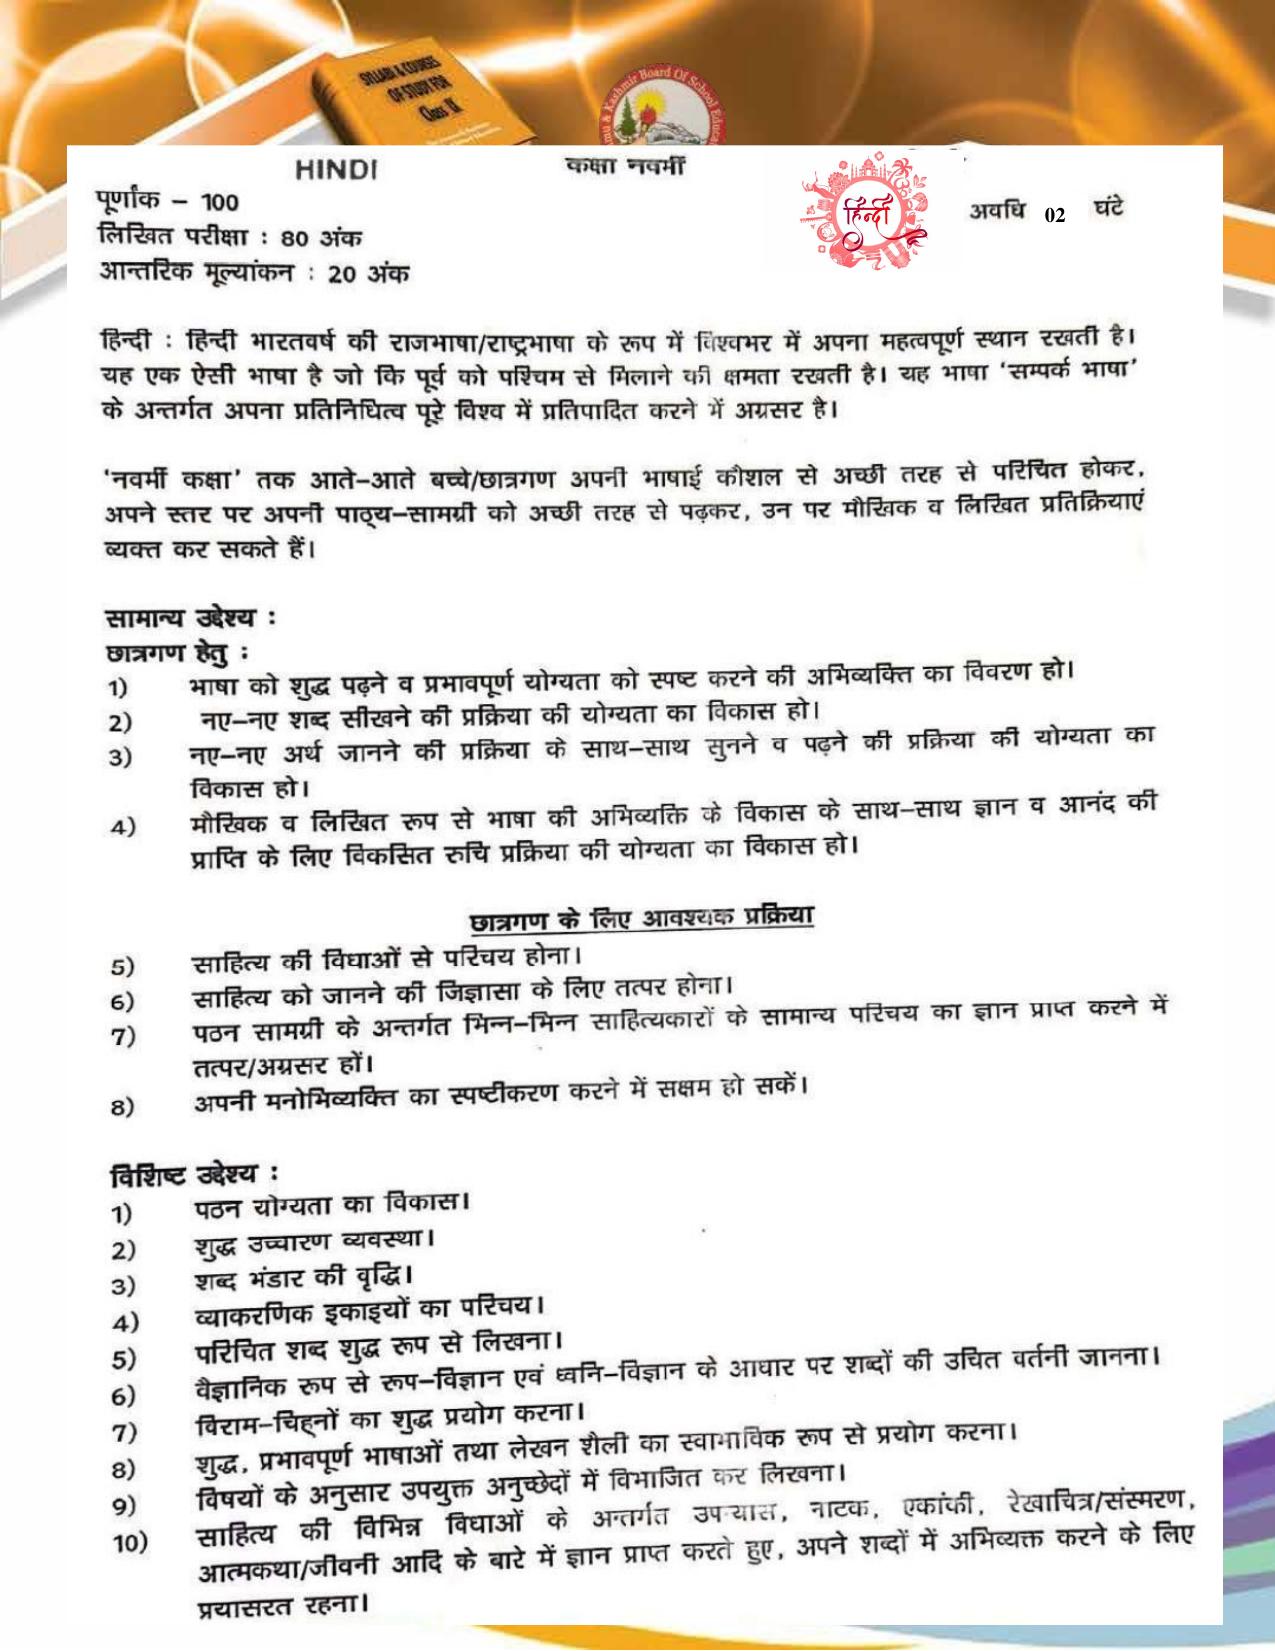 JKBOSE Syllabus for 9th class - Page 17